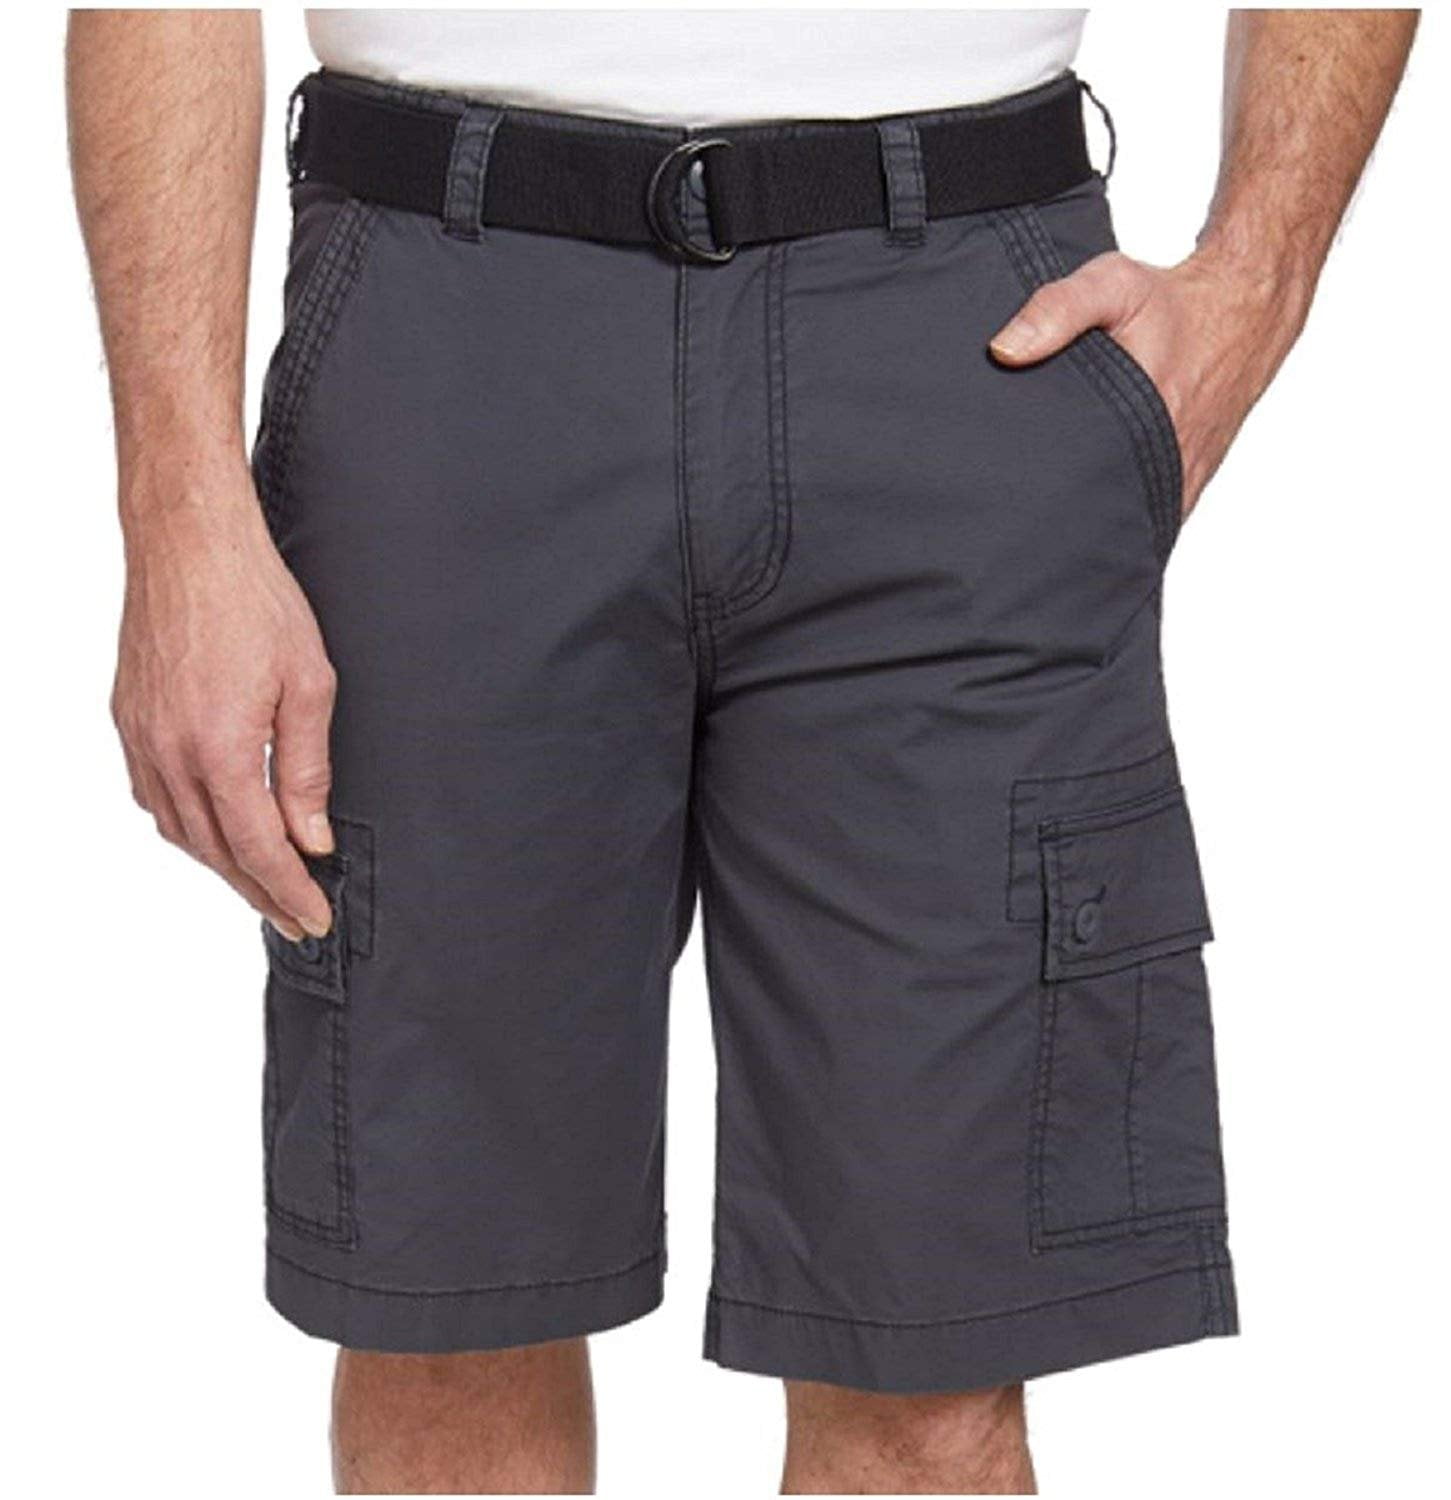 NWT Men's US Polo Assn Belted Cargo Shorts Sizes/Colors Vary 